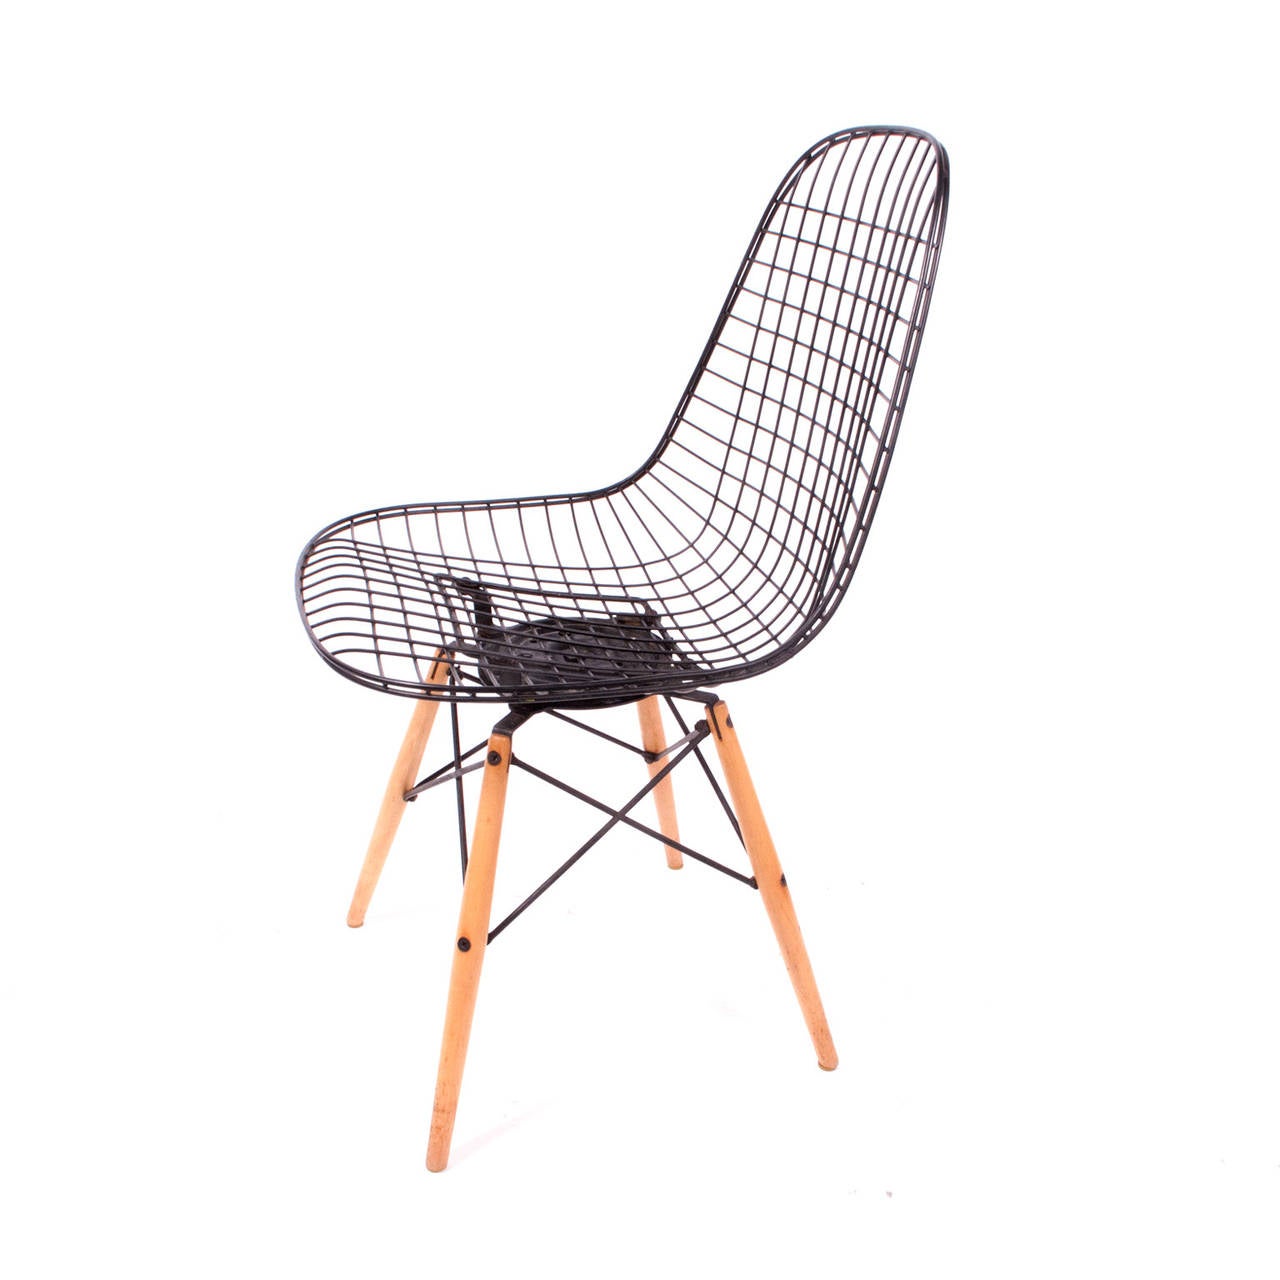 All original Charles and Ray Eames PKW chair by Herman Miller, black wire seat with brown wool seat pad, birch dowel legs with black wire struts, 18